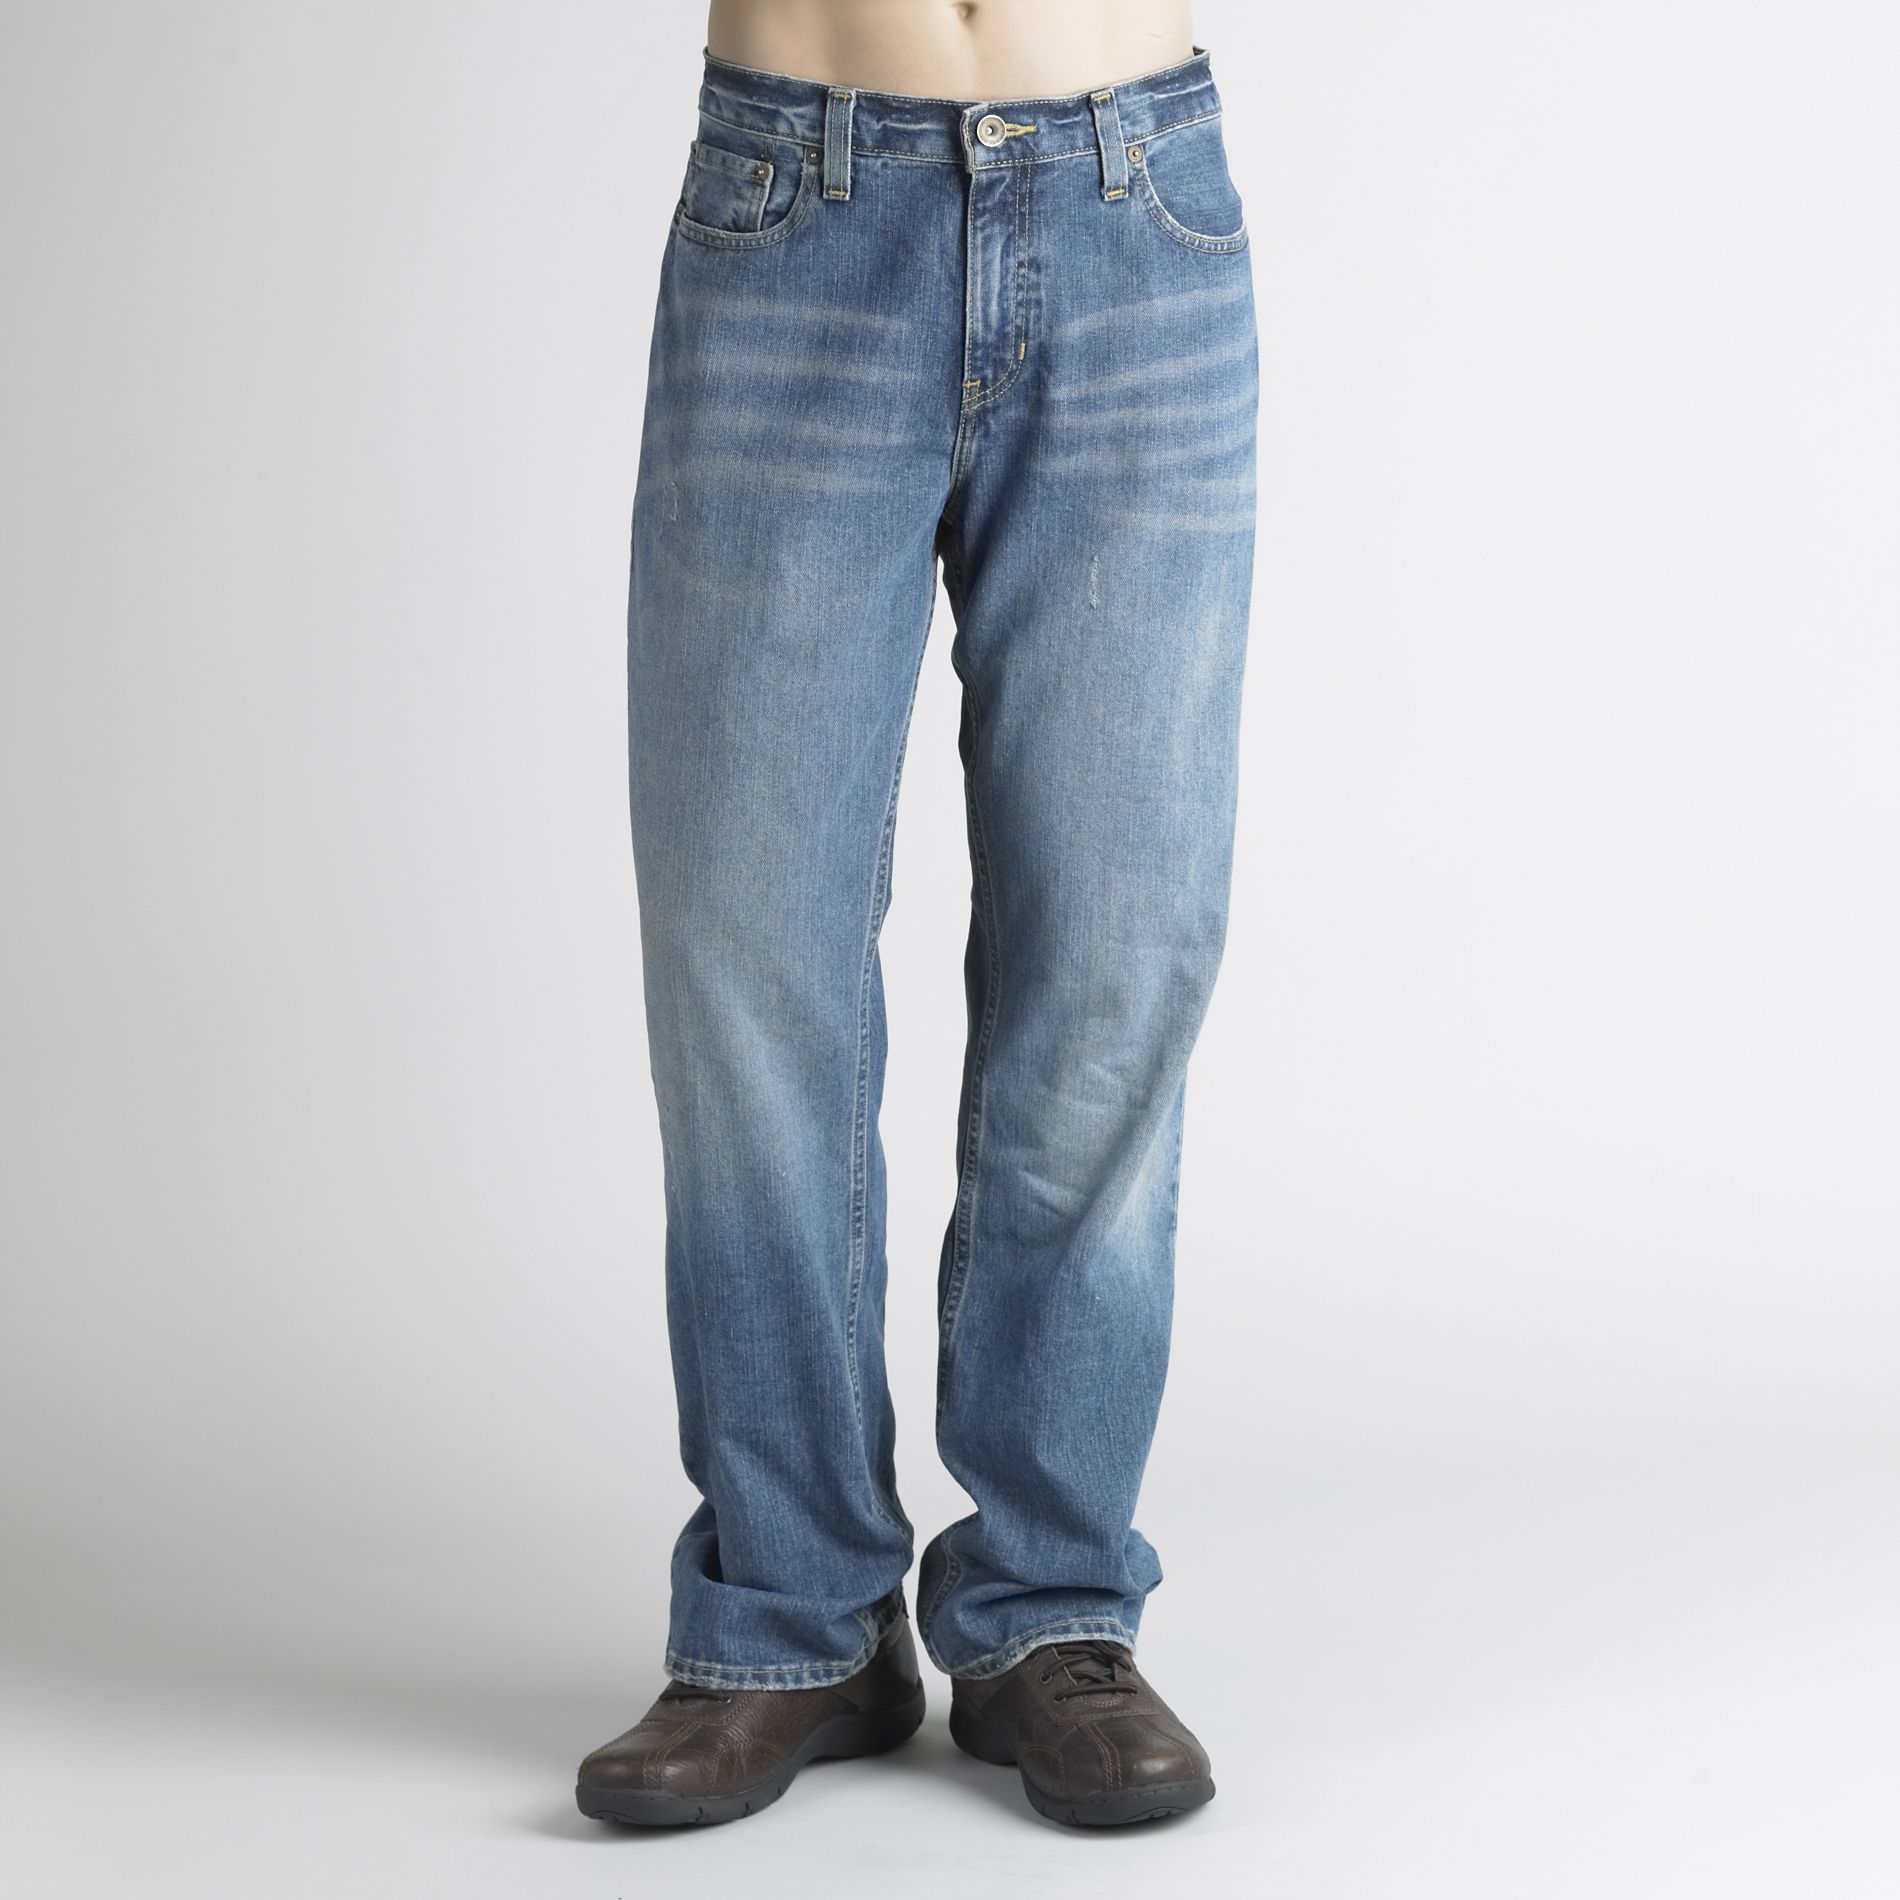 do the men's sears roebuck jeans run true to size | Shop Your Way ...